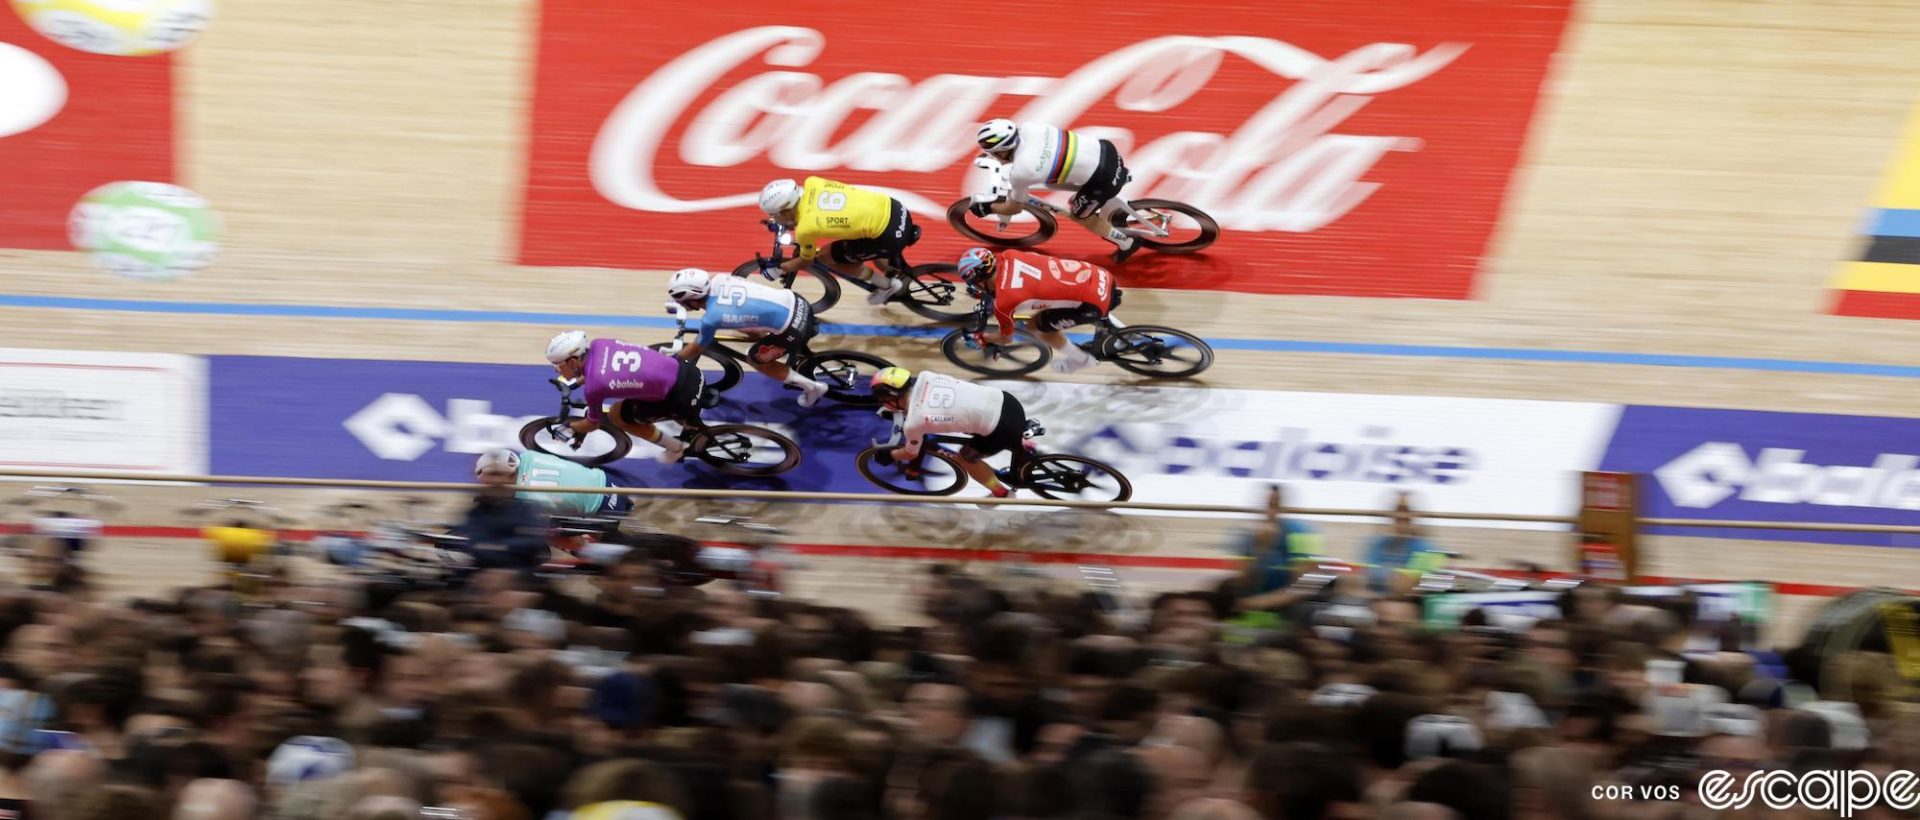 Six racers ride in a tight pack through one of the corners on the Gent track. The Coca-cola logo behind them is a blur, and the blurred infield is full of fans.